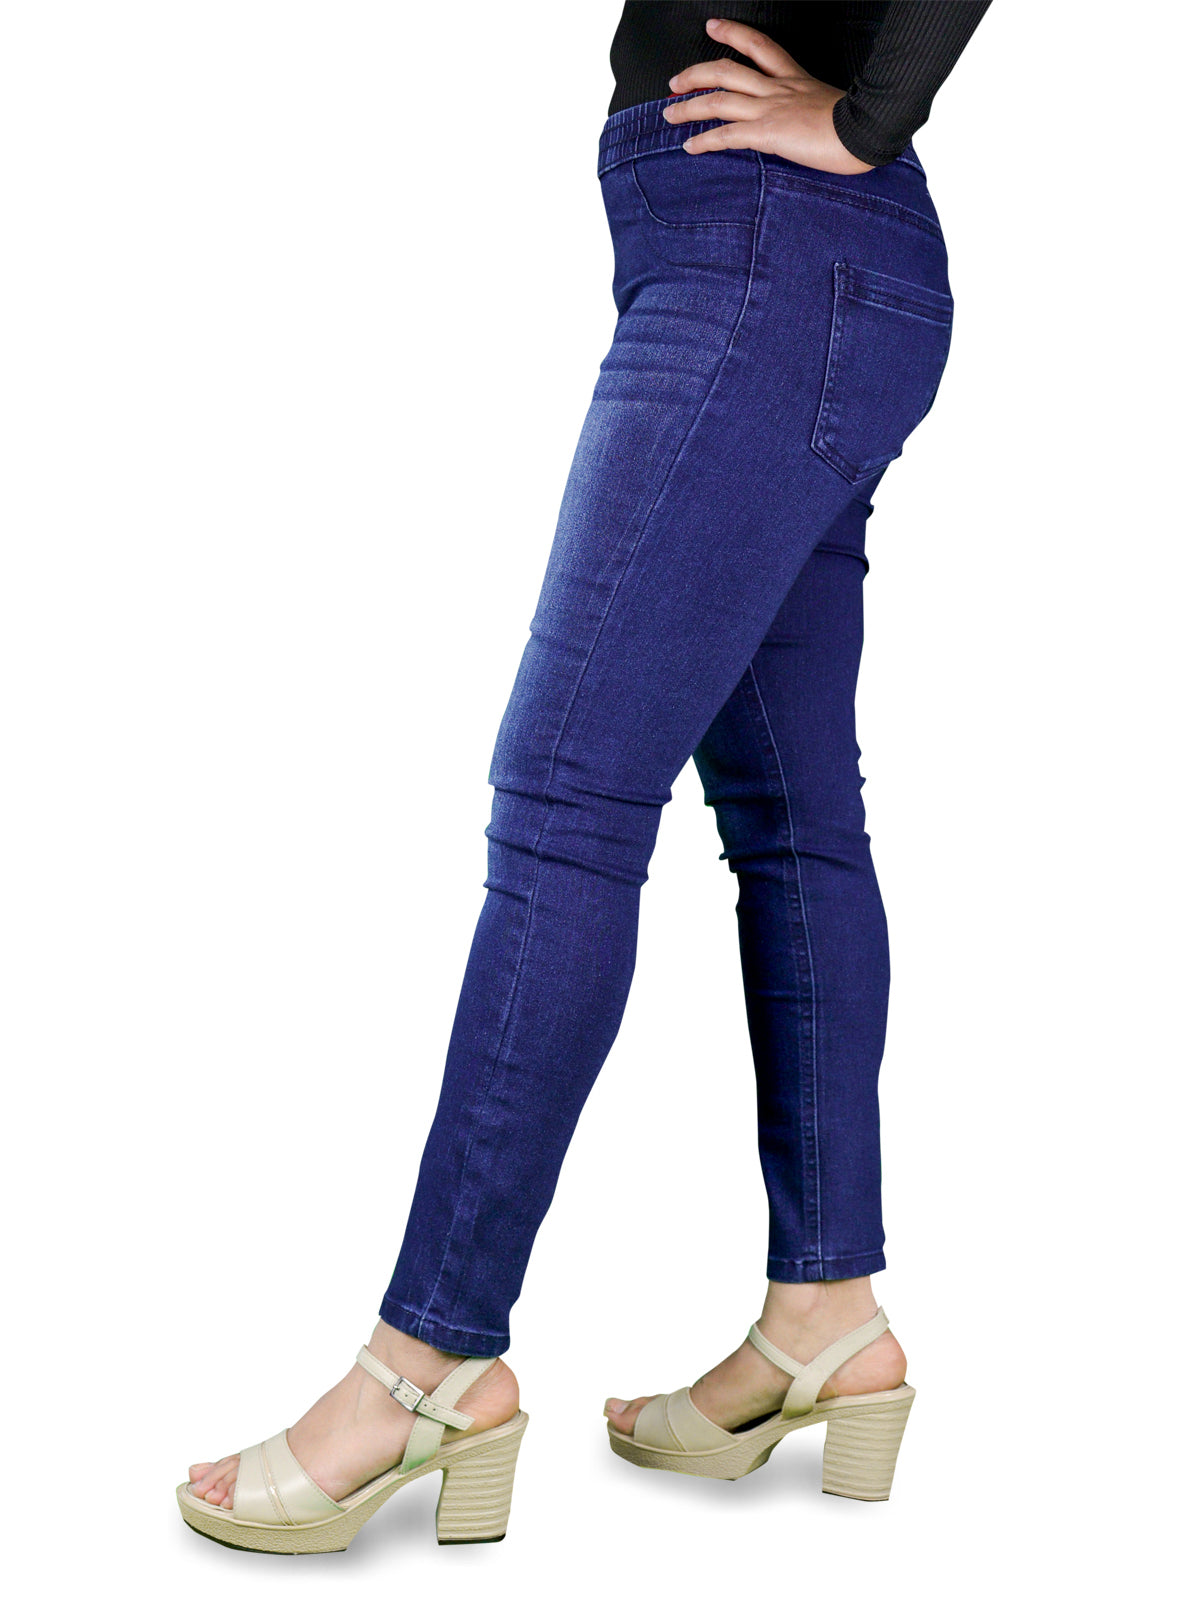 Women's Super Stretchy Skinny Fit Pull-On Closure Denim Jeggings